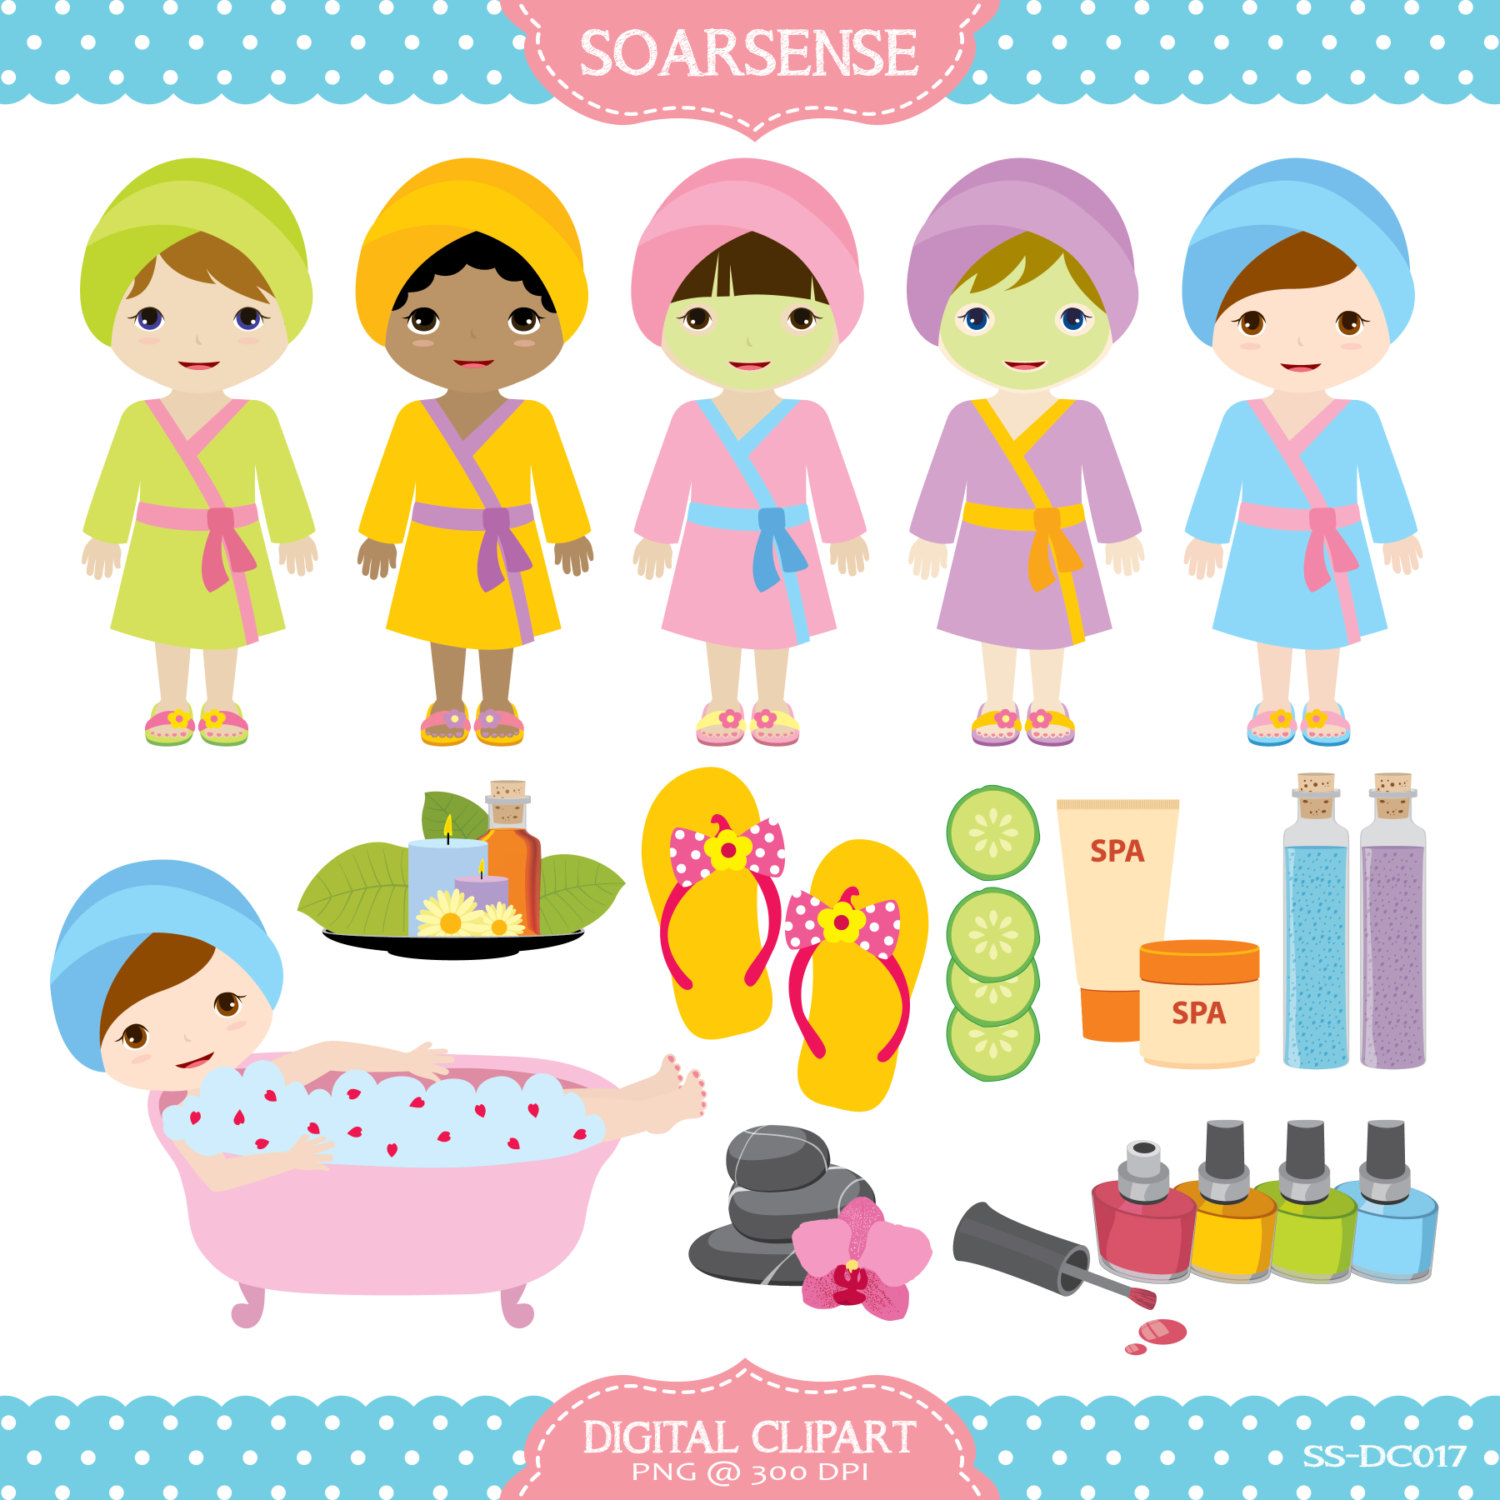 spa party clipart may - Spa Images Clip Art Free